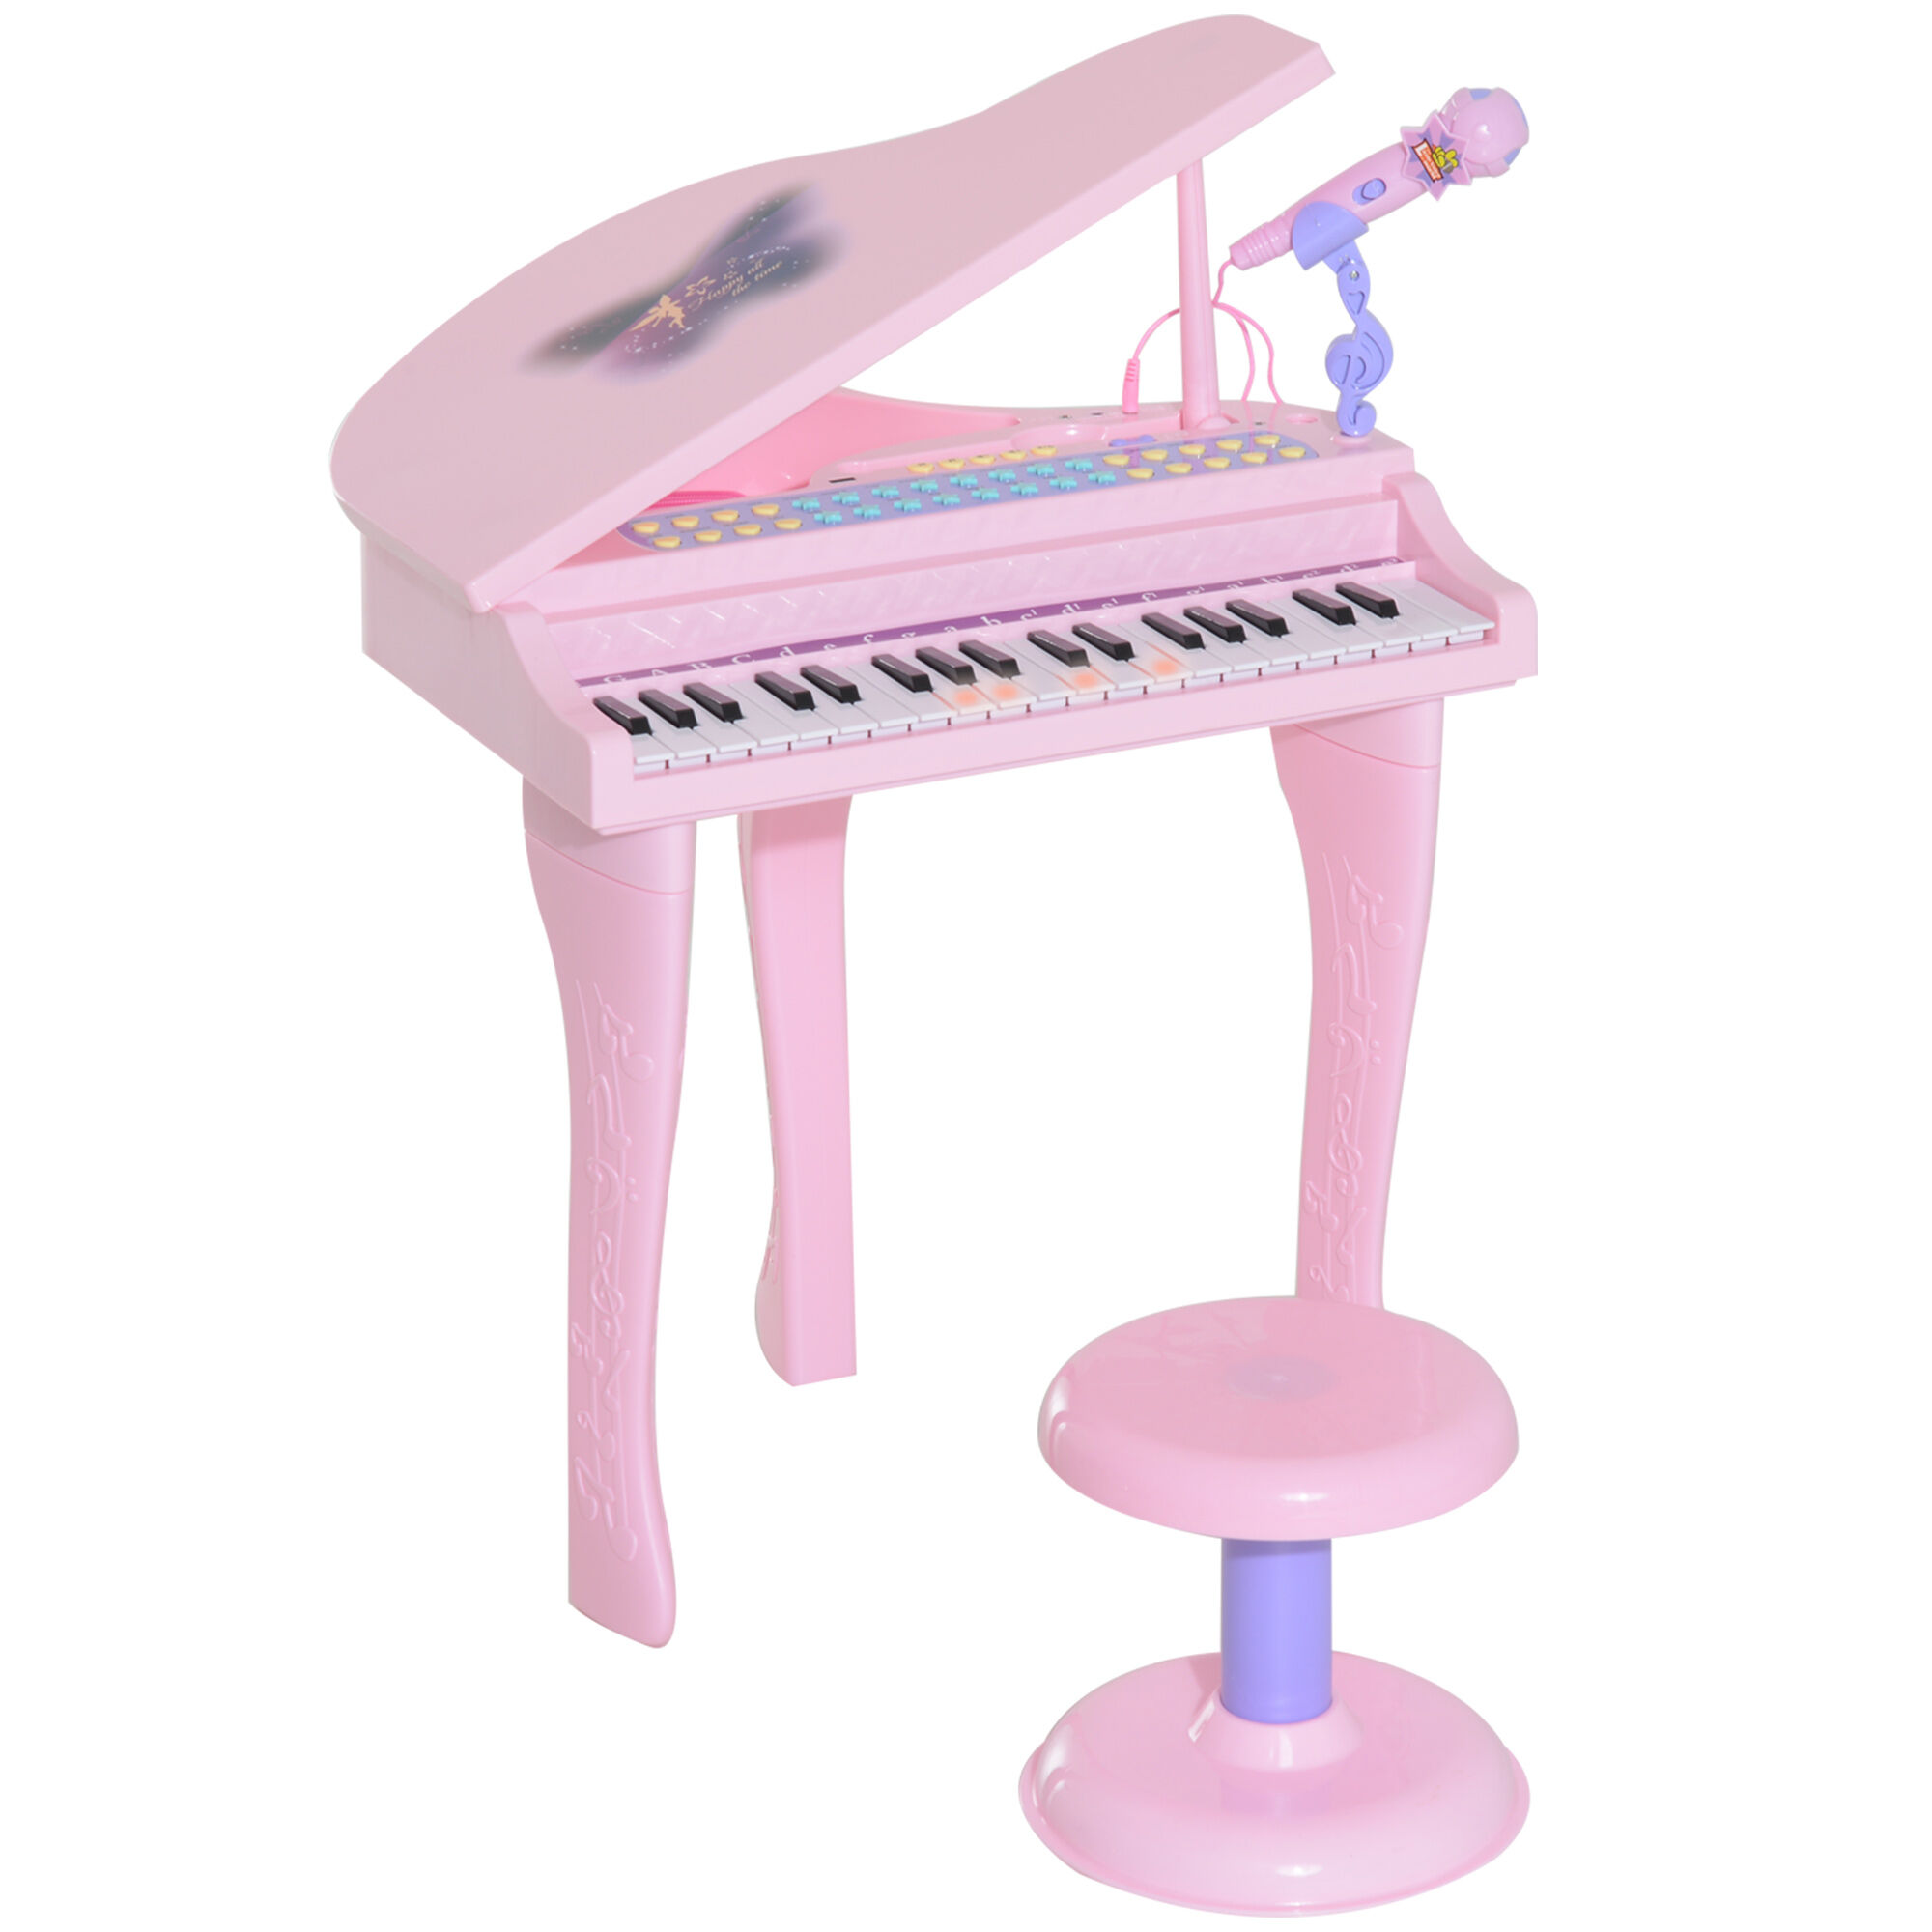 HOMCOM Mini Electronic Piano with Stool, Educational Musical Instrument, Interactive Play, Pink